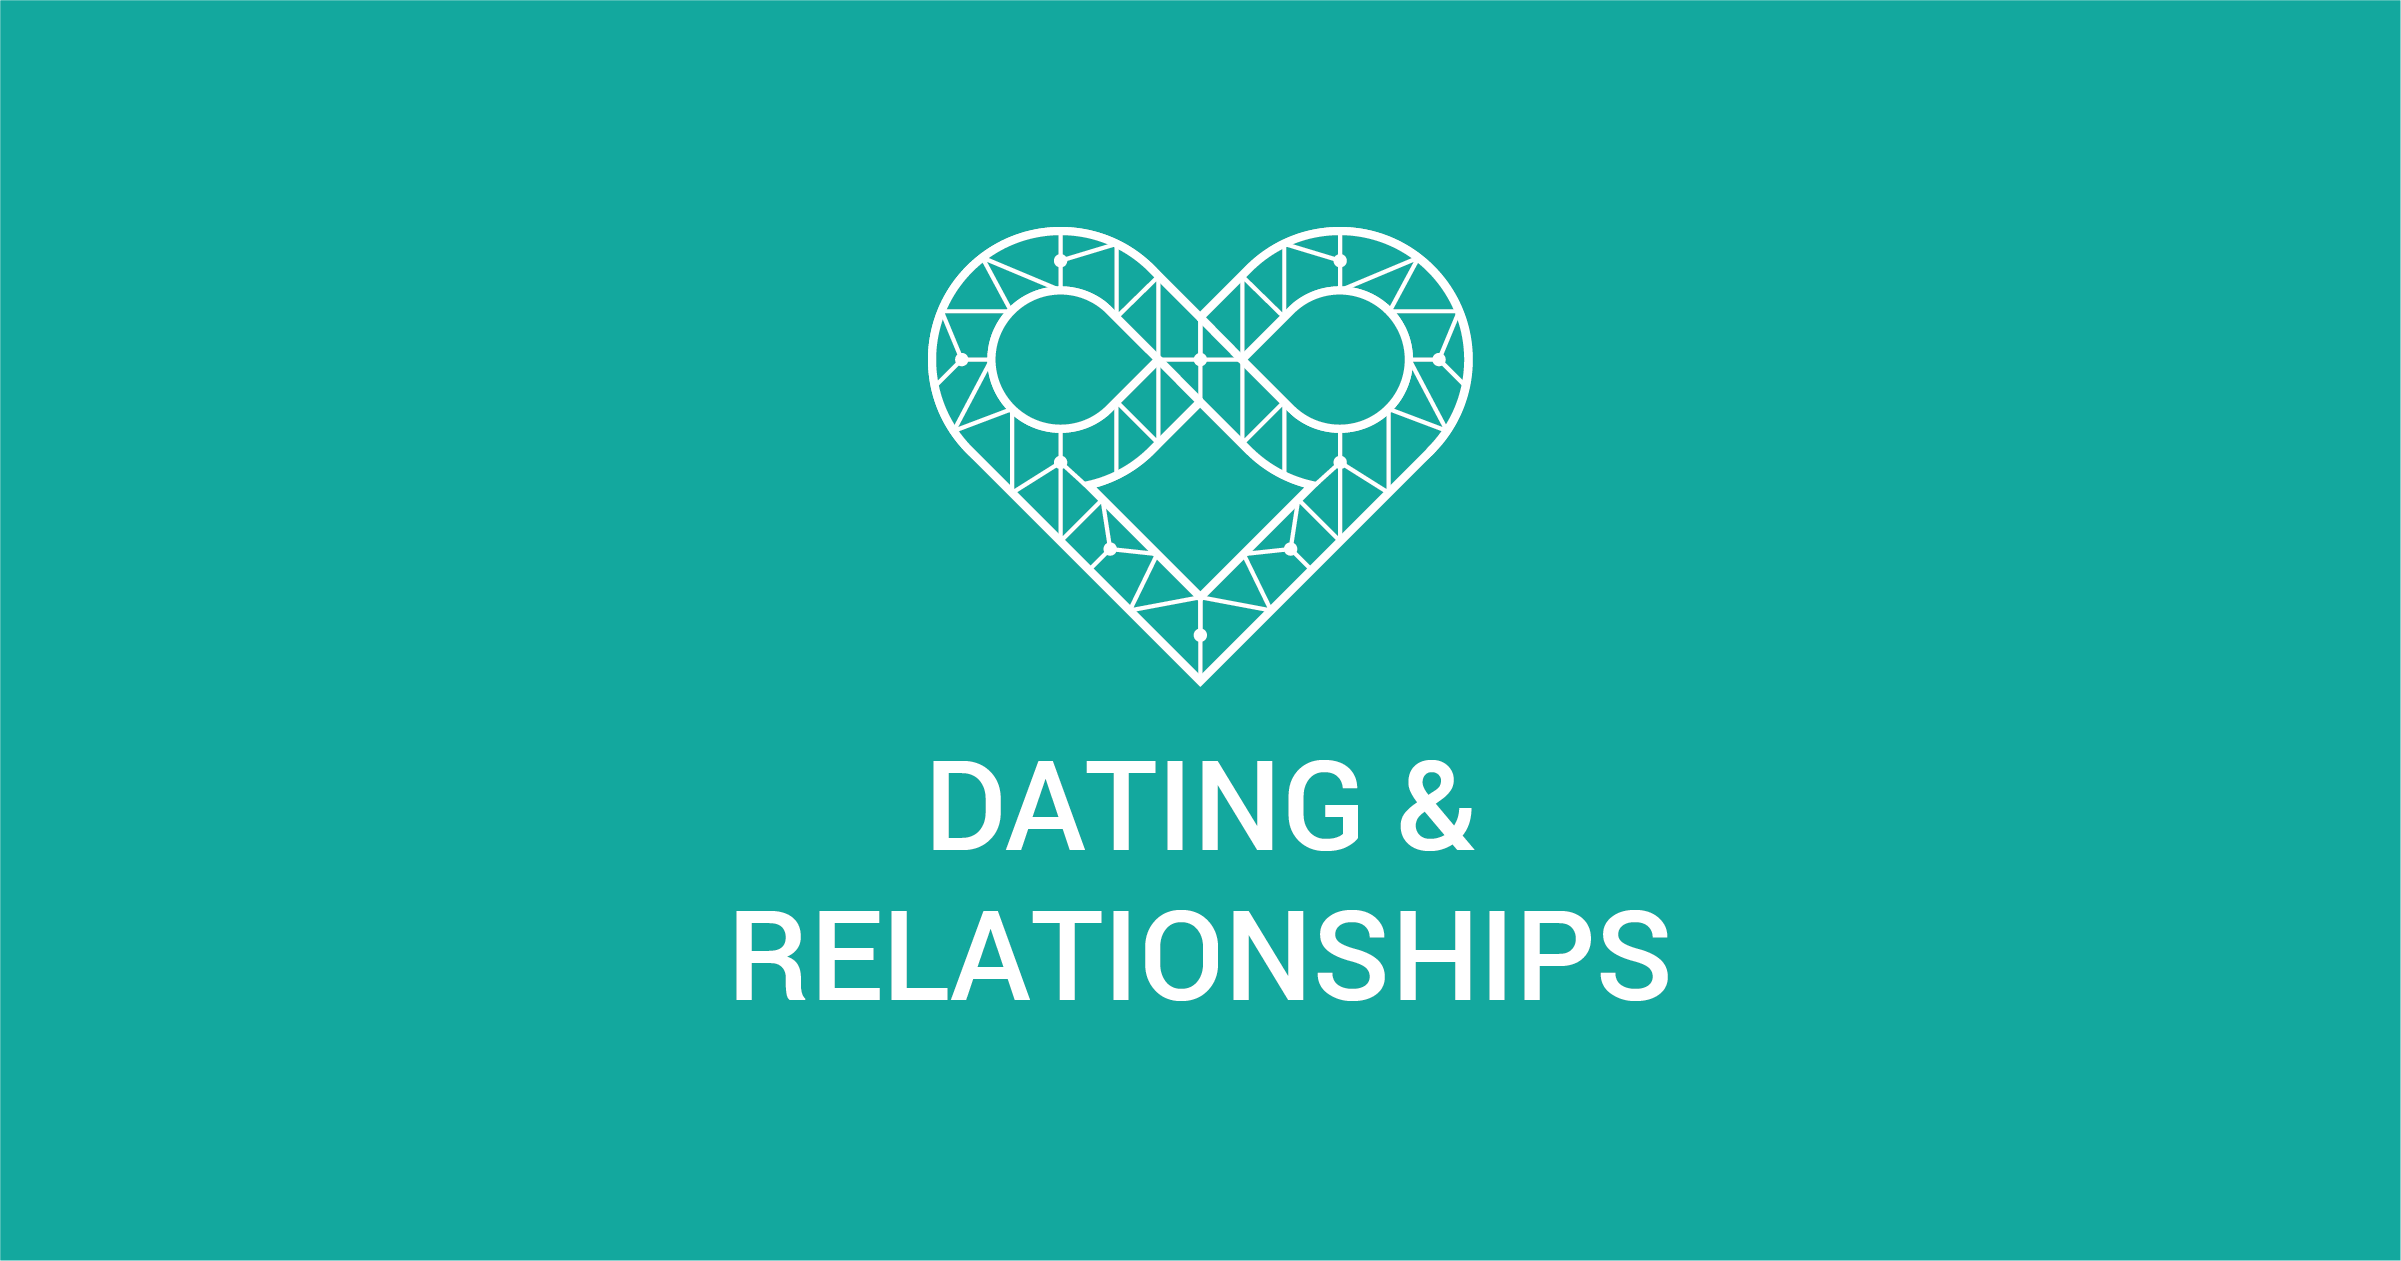 A white heart outline with an infinity symbol as part of the top design and the words "Dating & Relationships" appear over a green background.